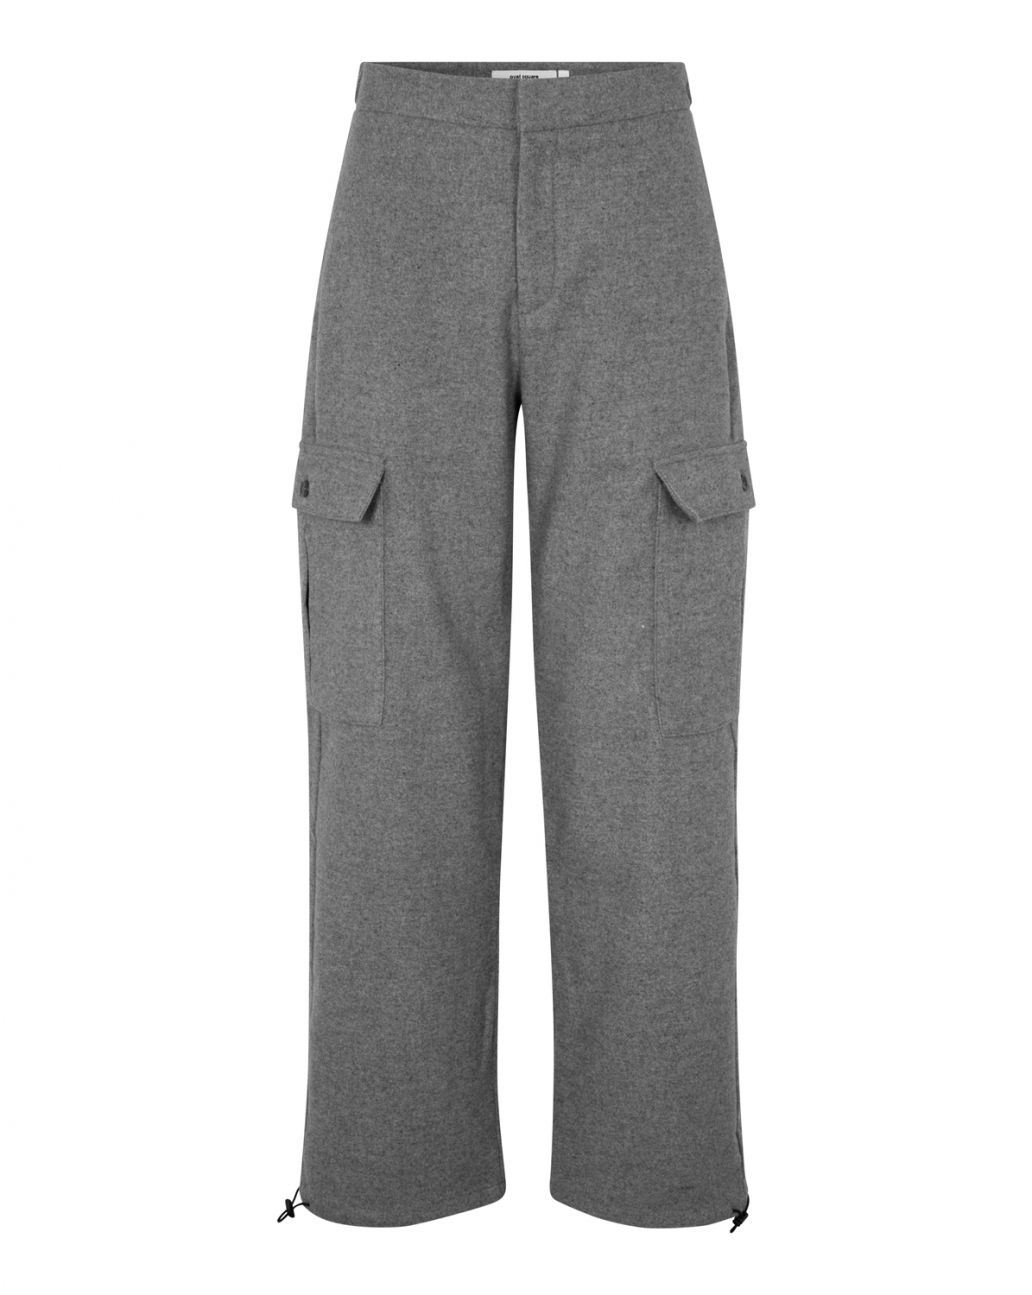 Oval Square Cargo Trousers